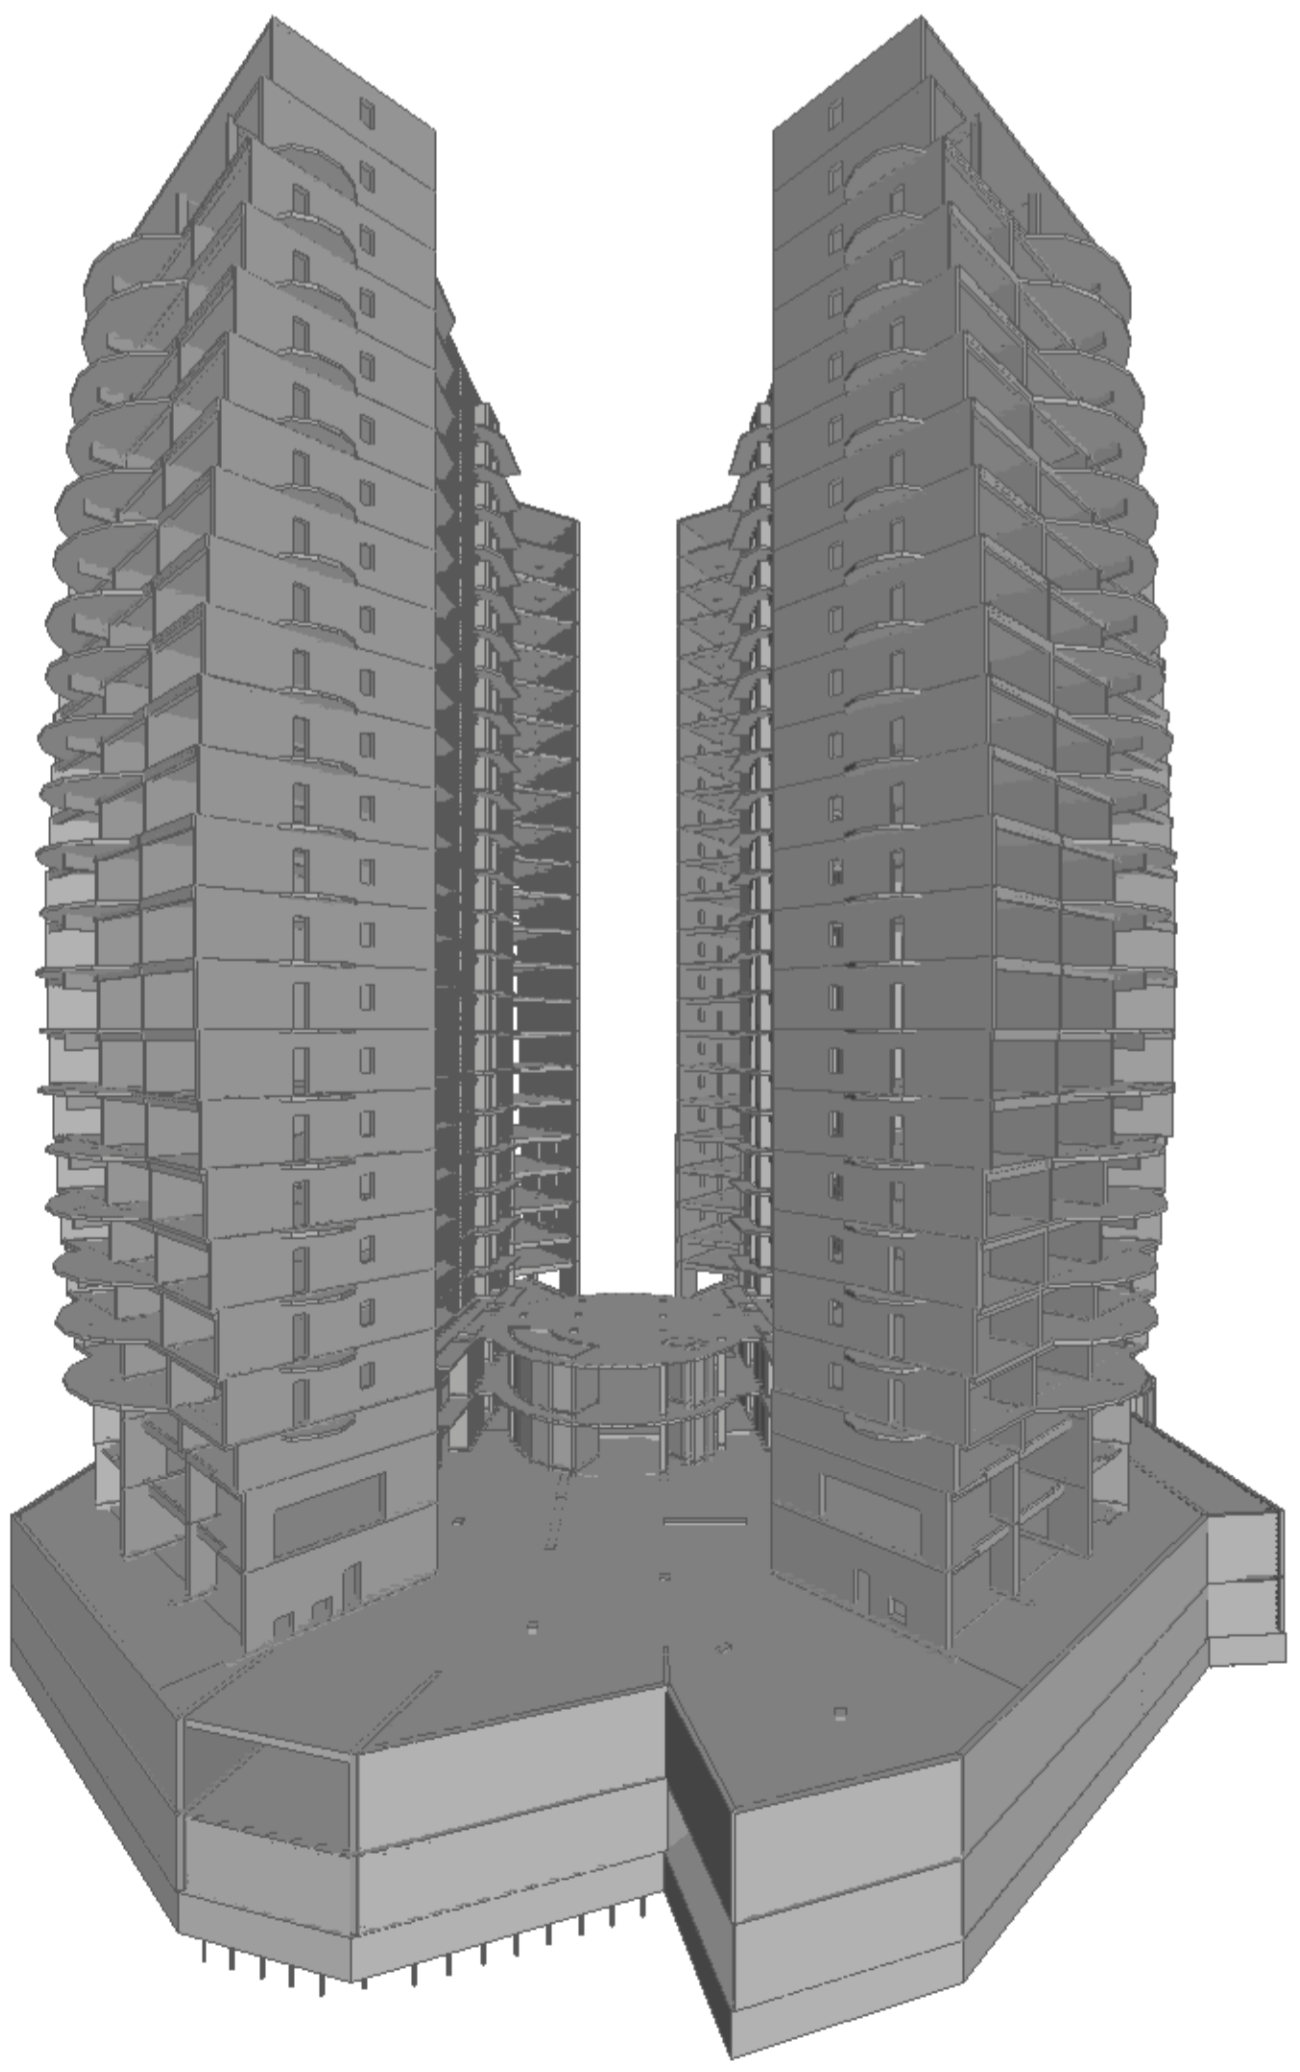 Displaying the building model with sections assigned in LIRA-SAPR